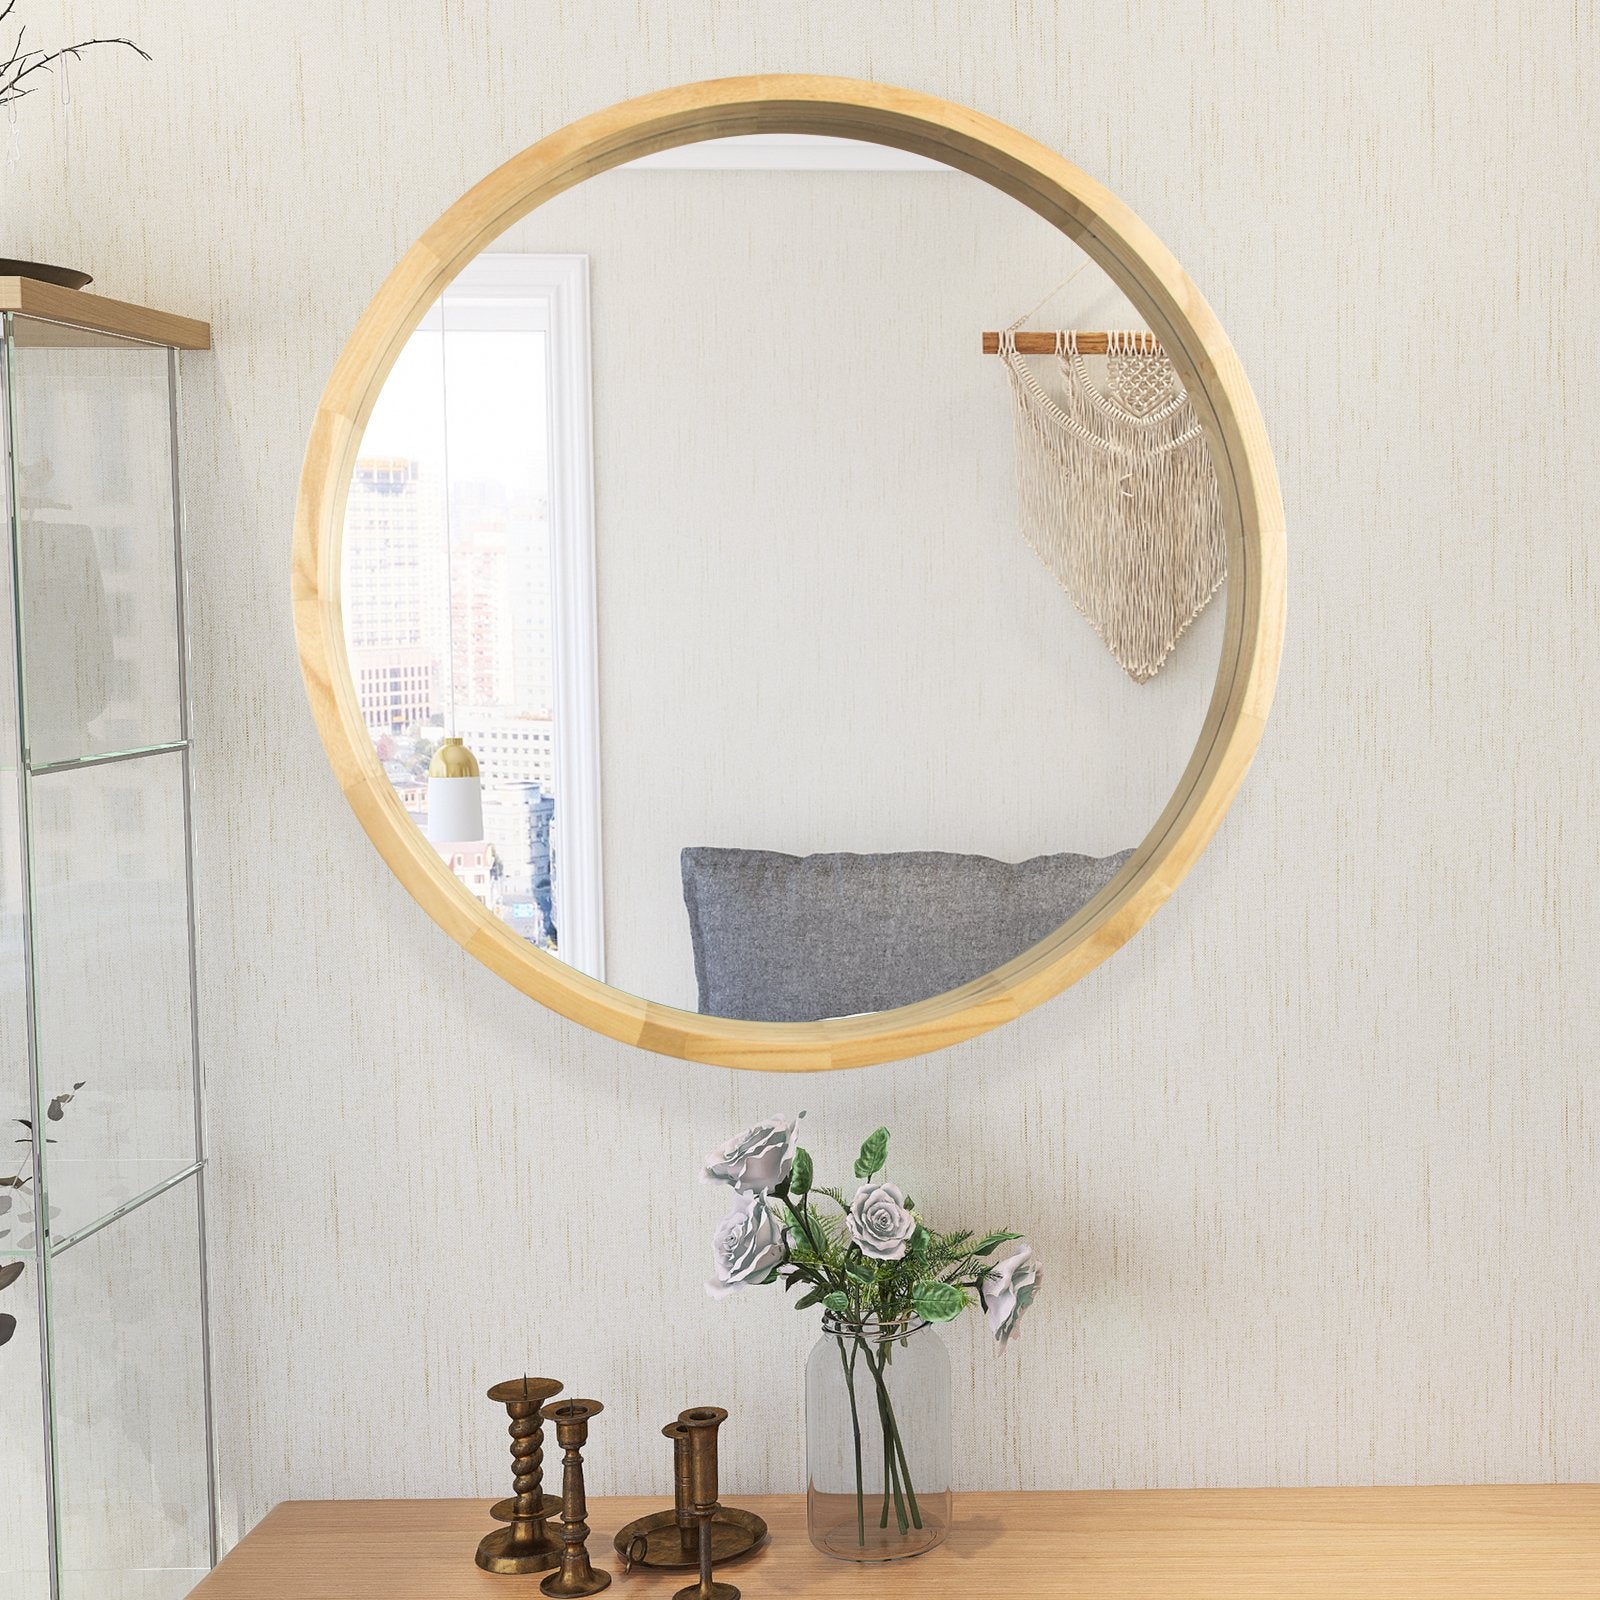 Circle Mirror with Wood Frame, Round Modern Decoration Large Mirror for Bathroom Living Room Bedroom Entryway, Walnut Natural, 30"-Boyel Living